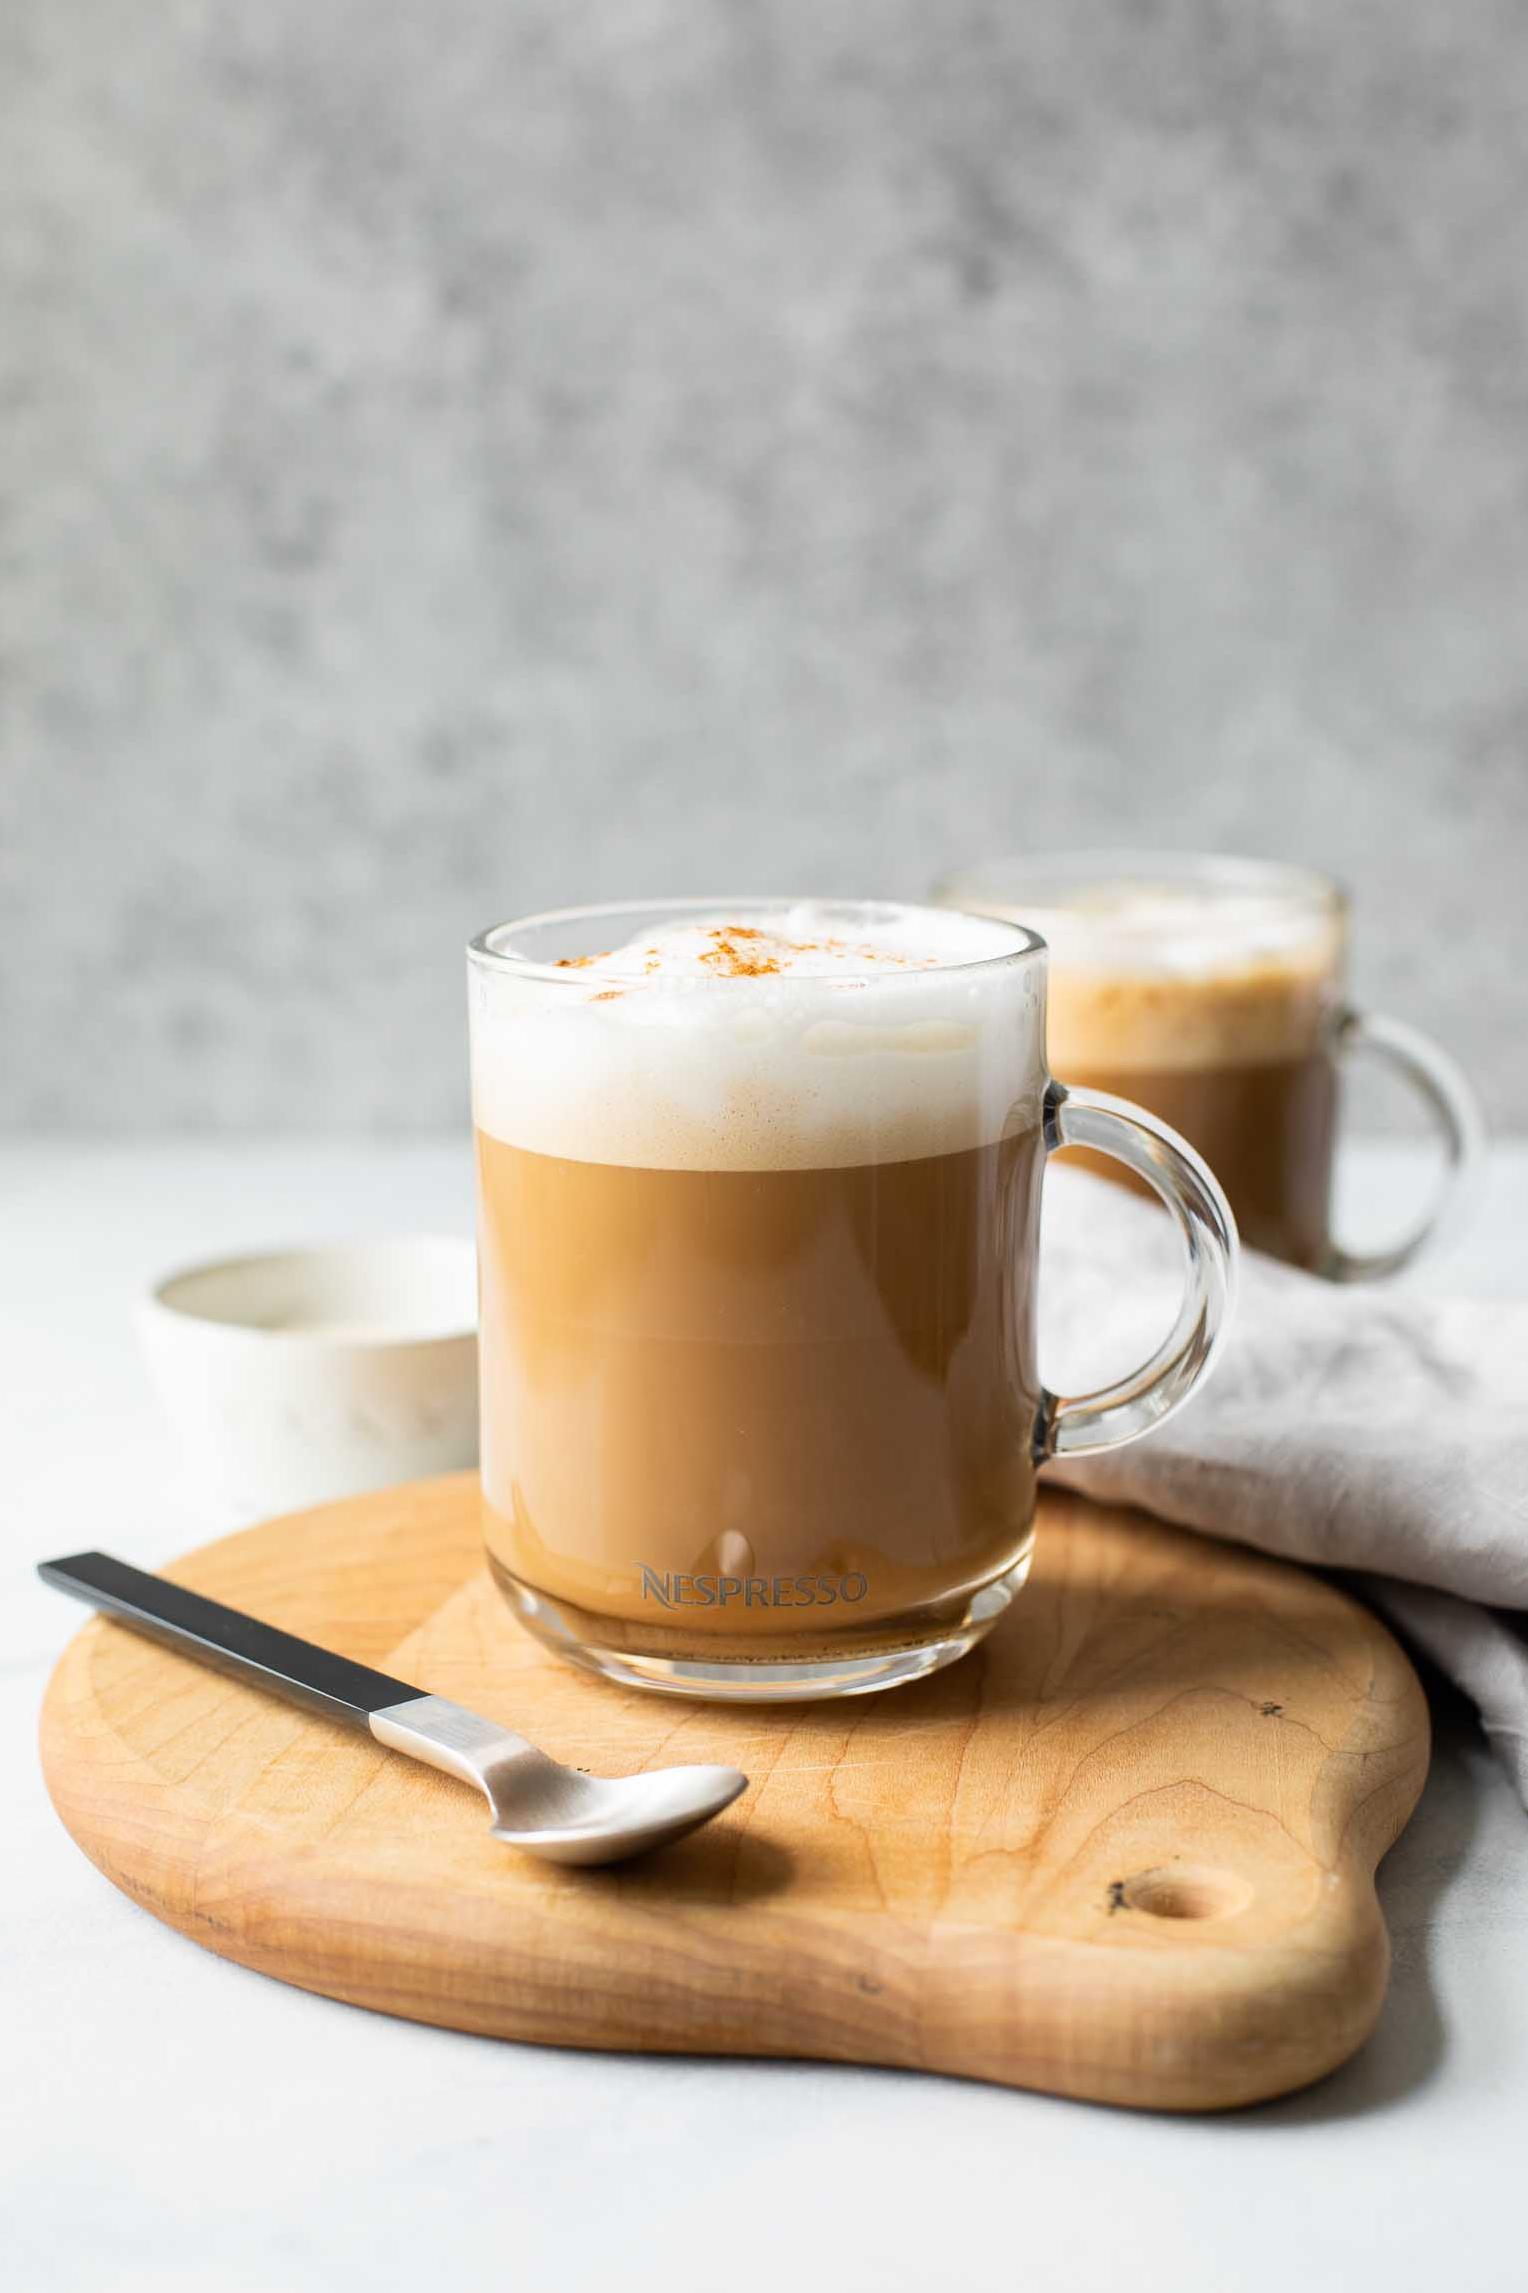  You deserve a latte treat, and this Vanilla Fudge Latte is just the thing!